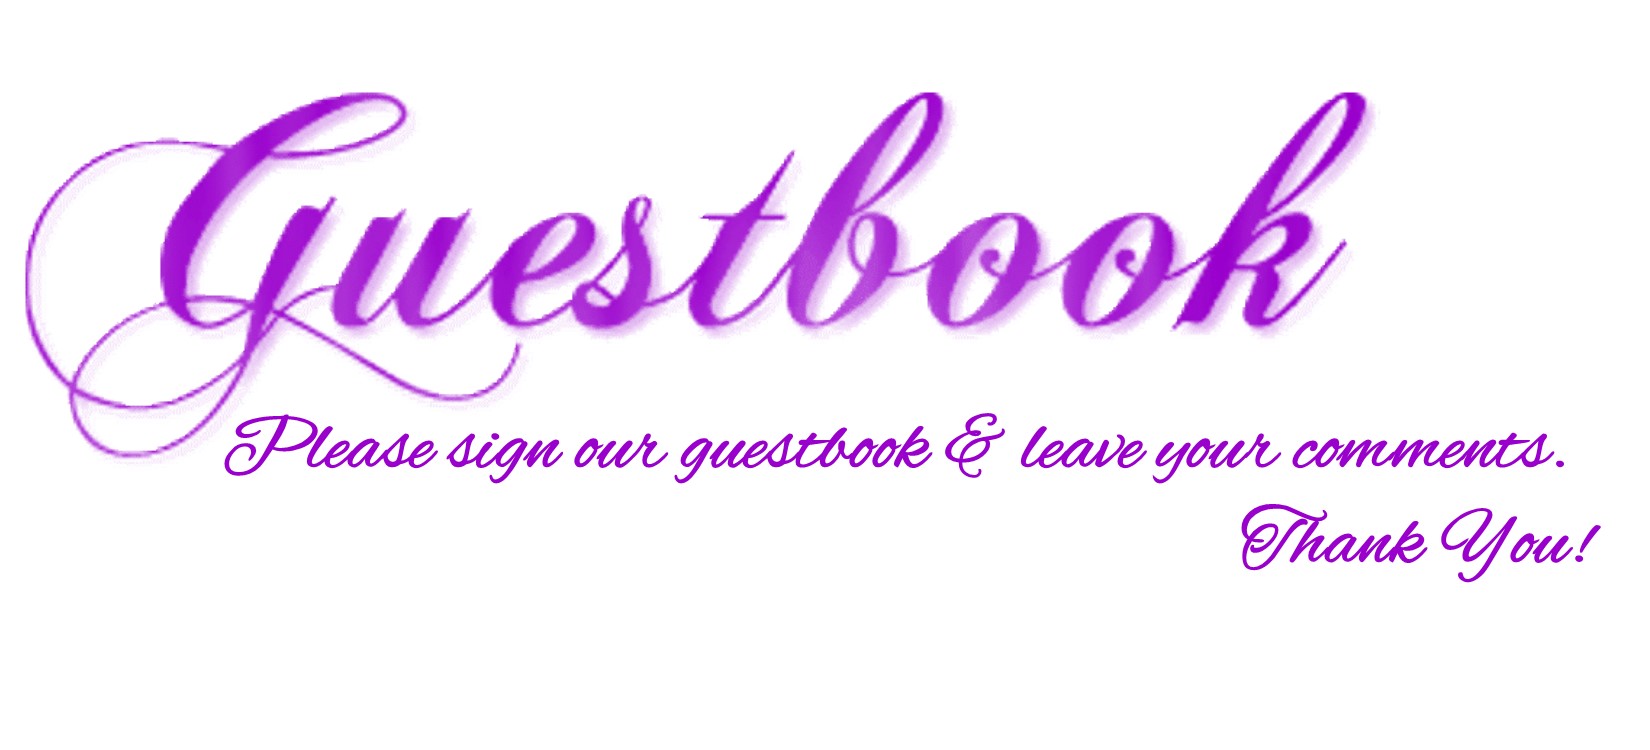 Guestbook new